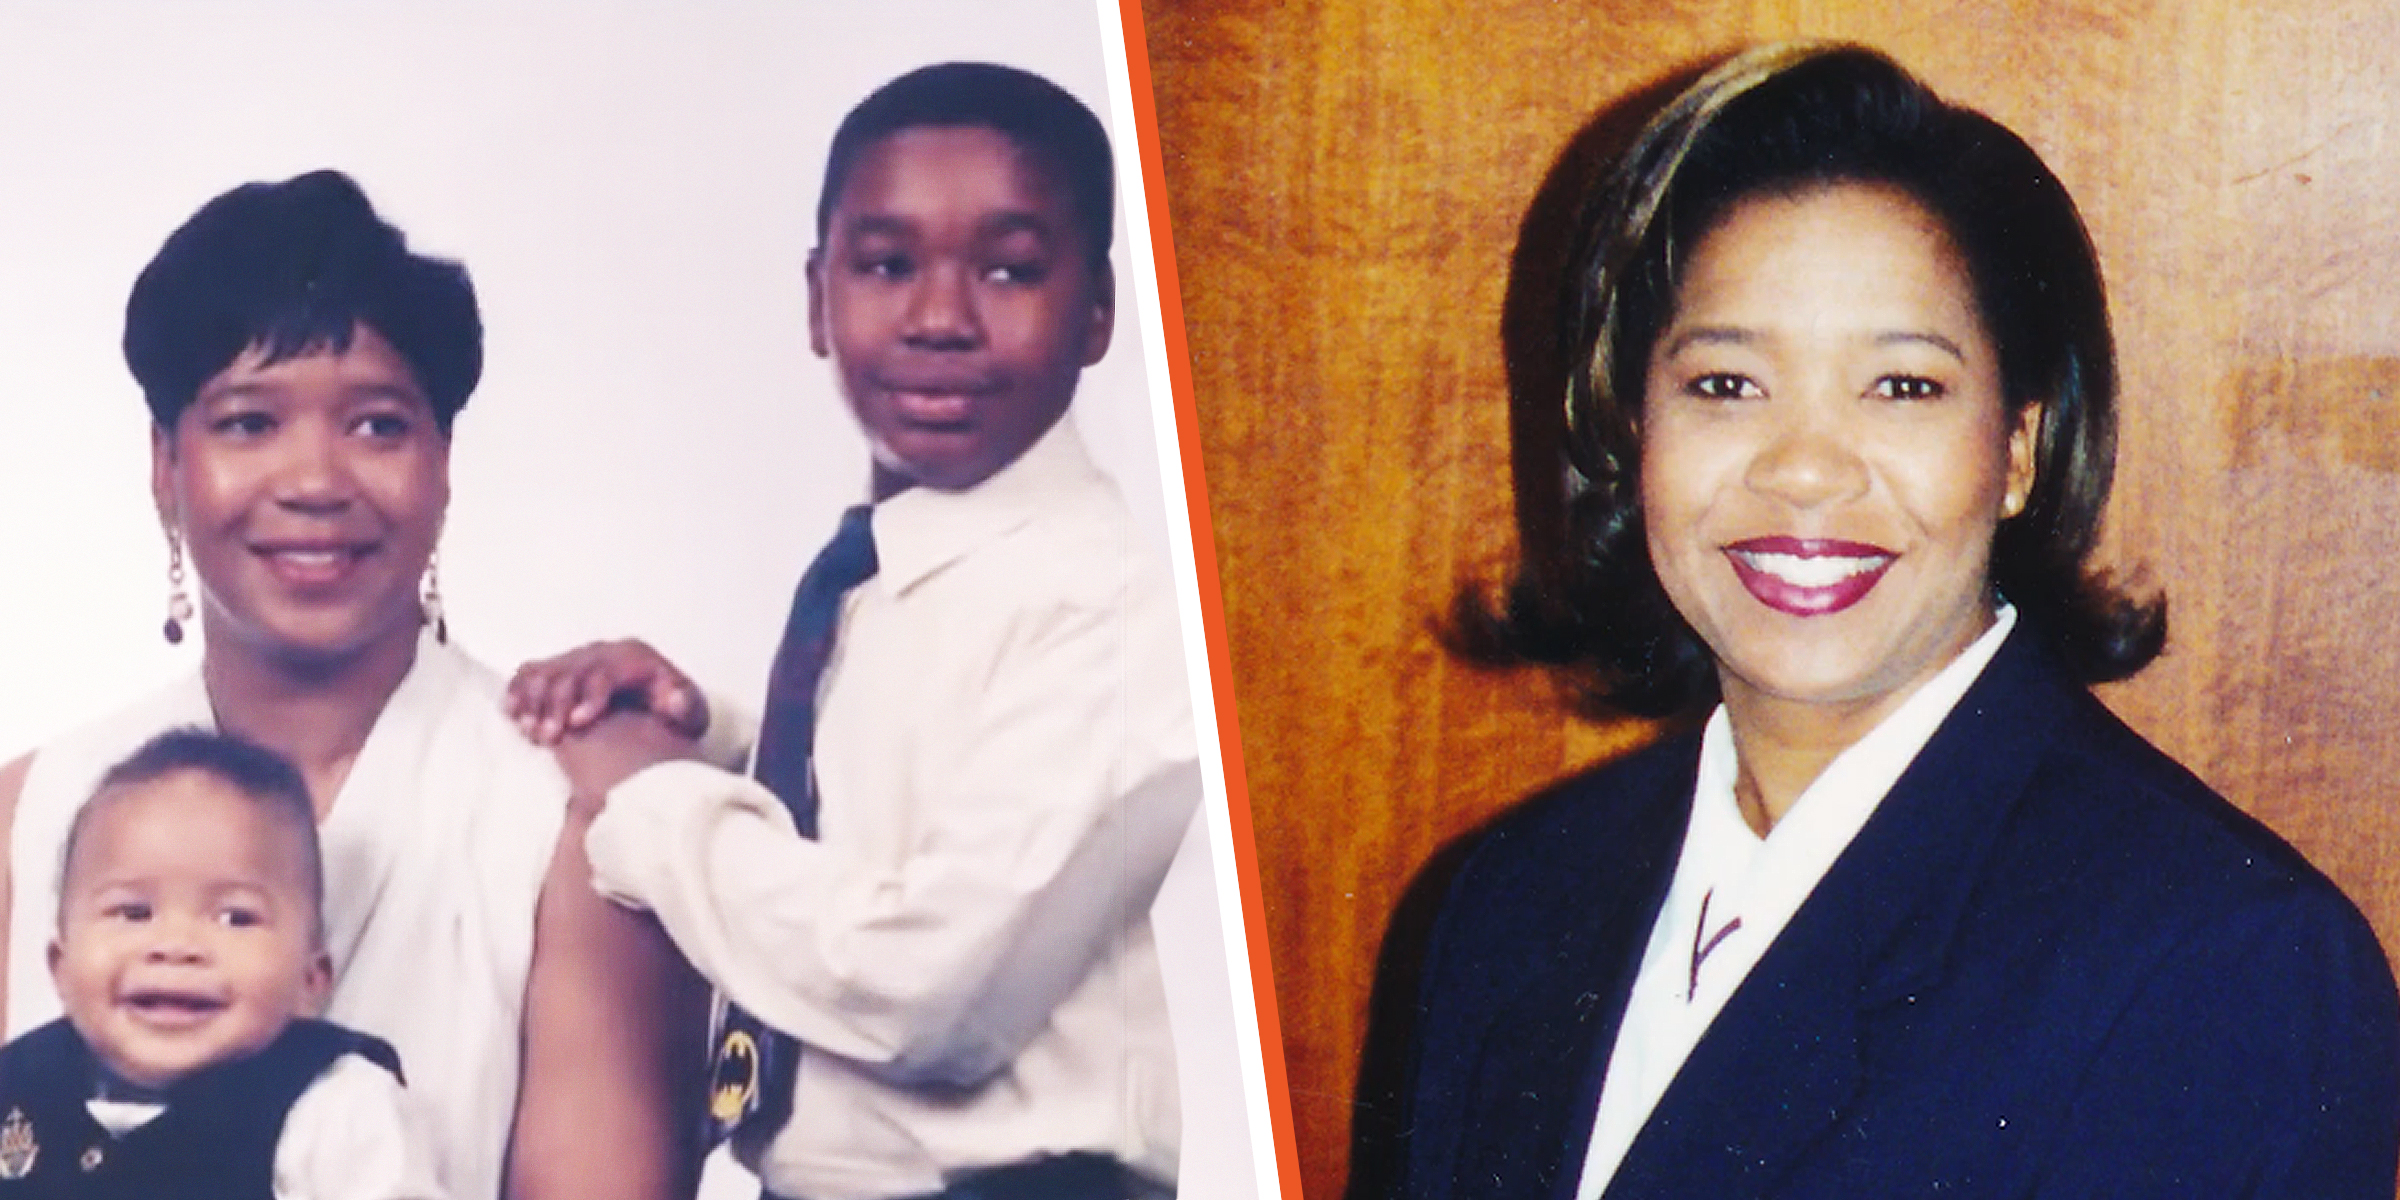 CeeCee Ross-Lyles and her sons, Jevon and Jerome | CeeCee Ross-Lyles | Source: youtube.com/@Flight93NationalMemorial